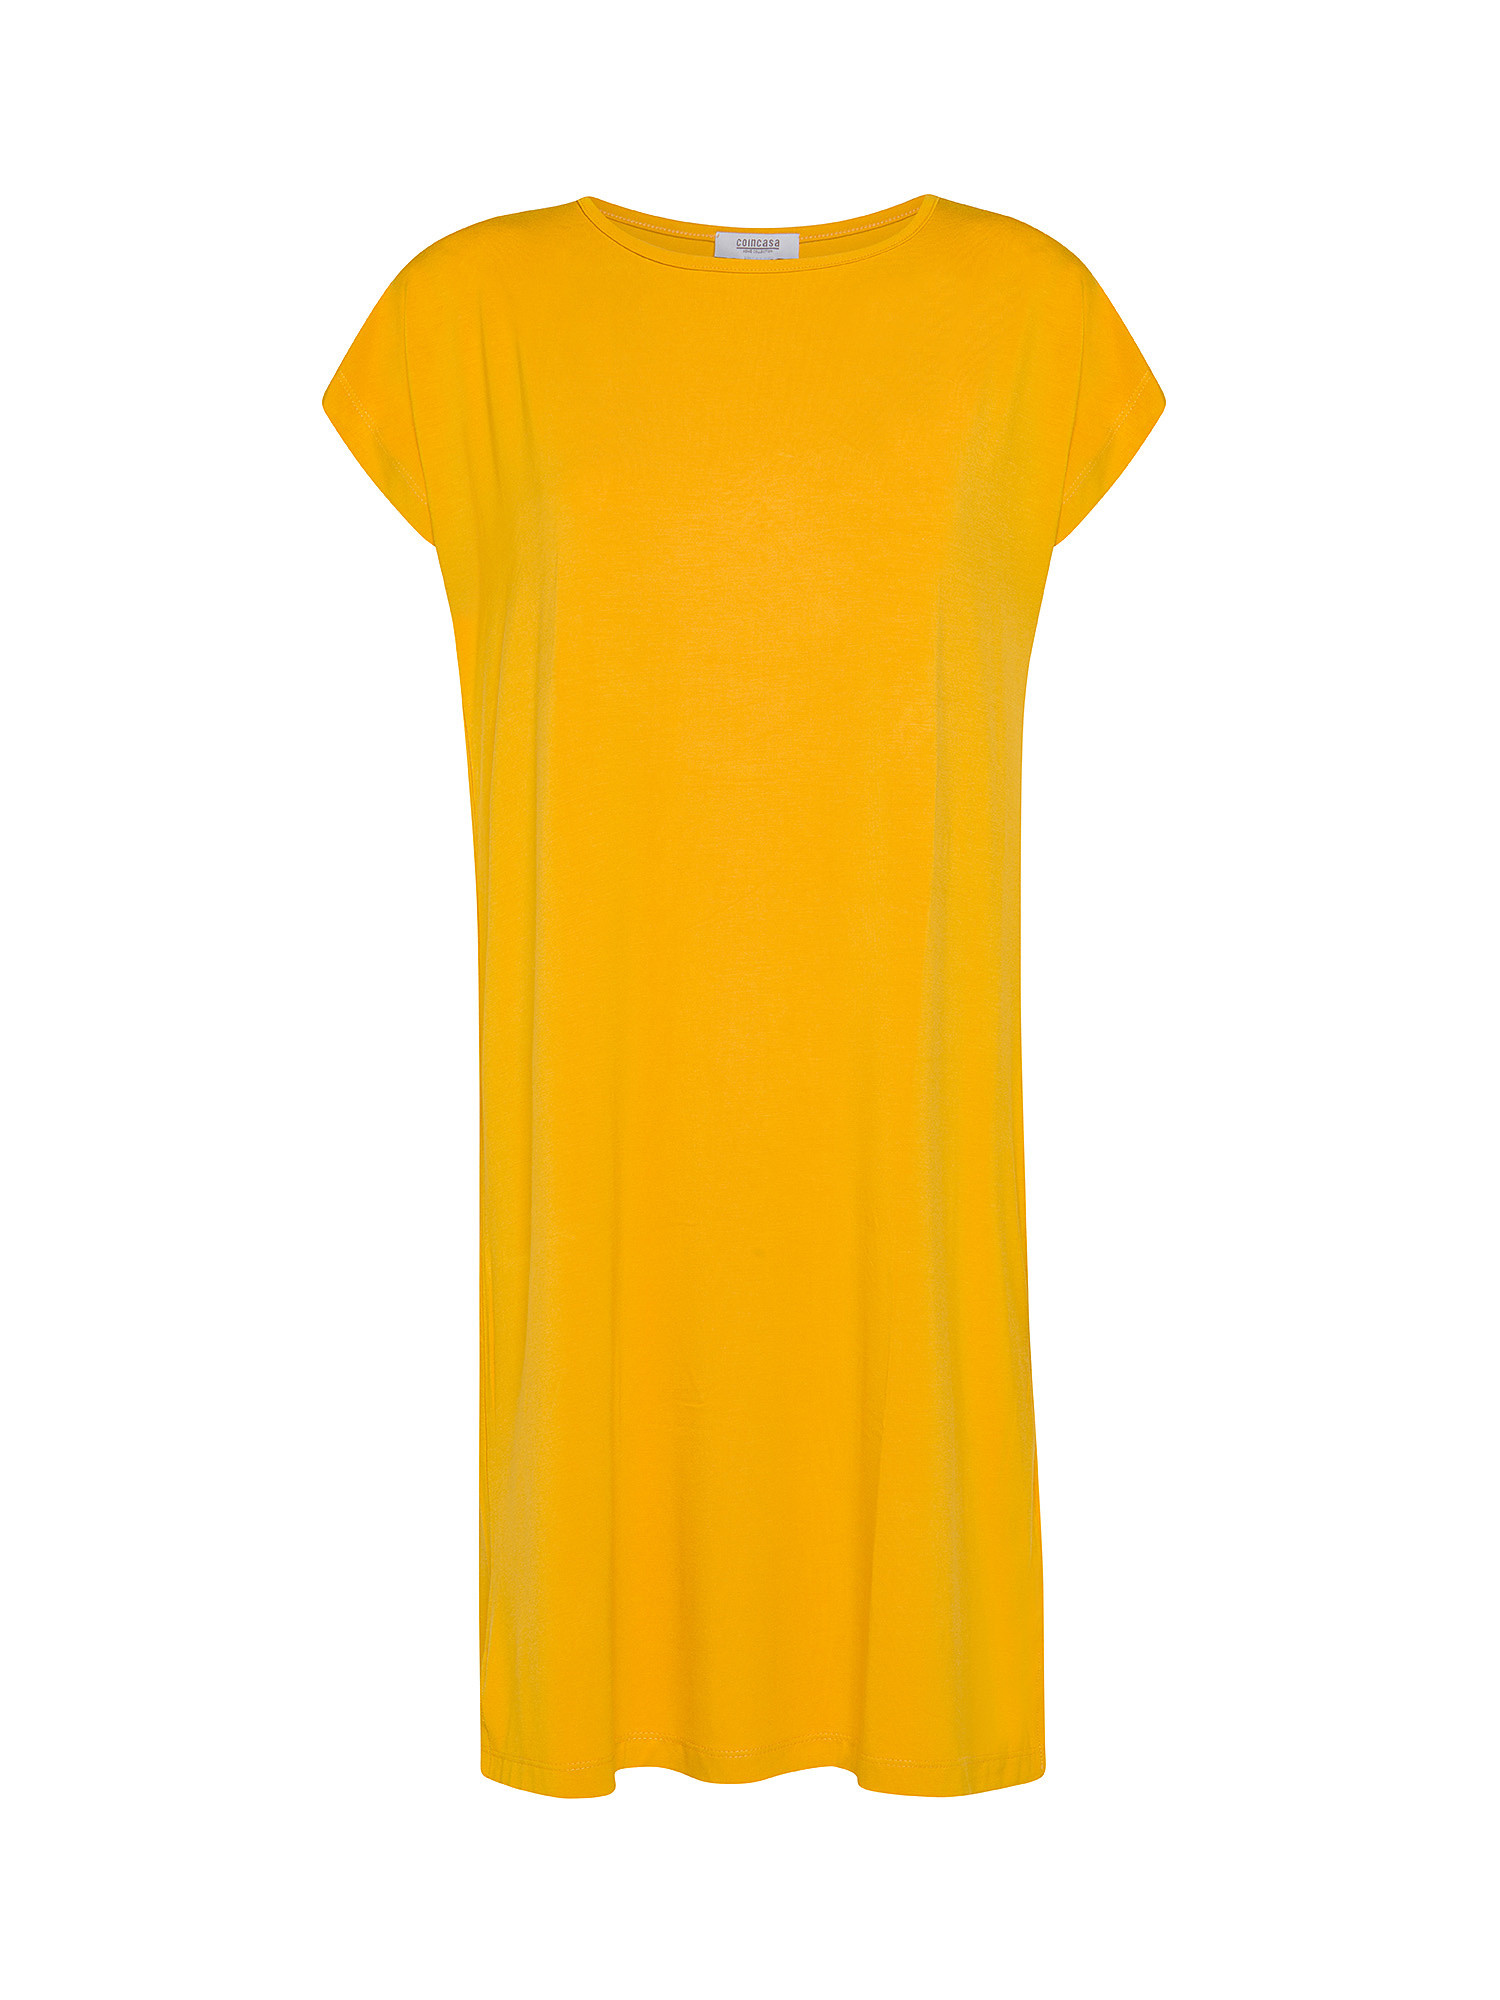 Solid color bamboo viscose dress, Ocra Yellow, large image number 0